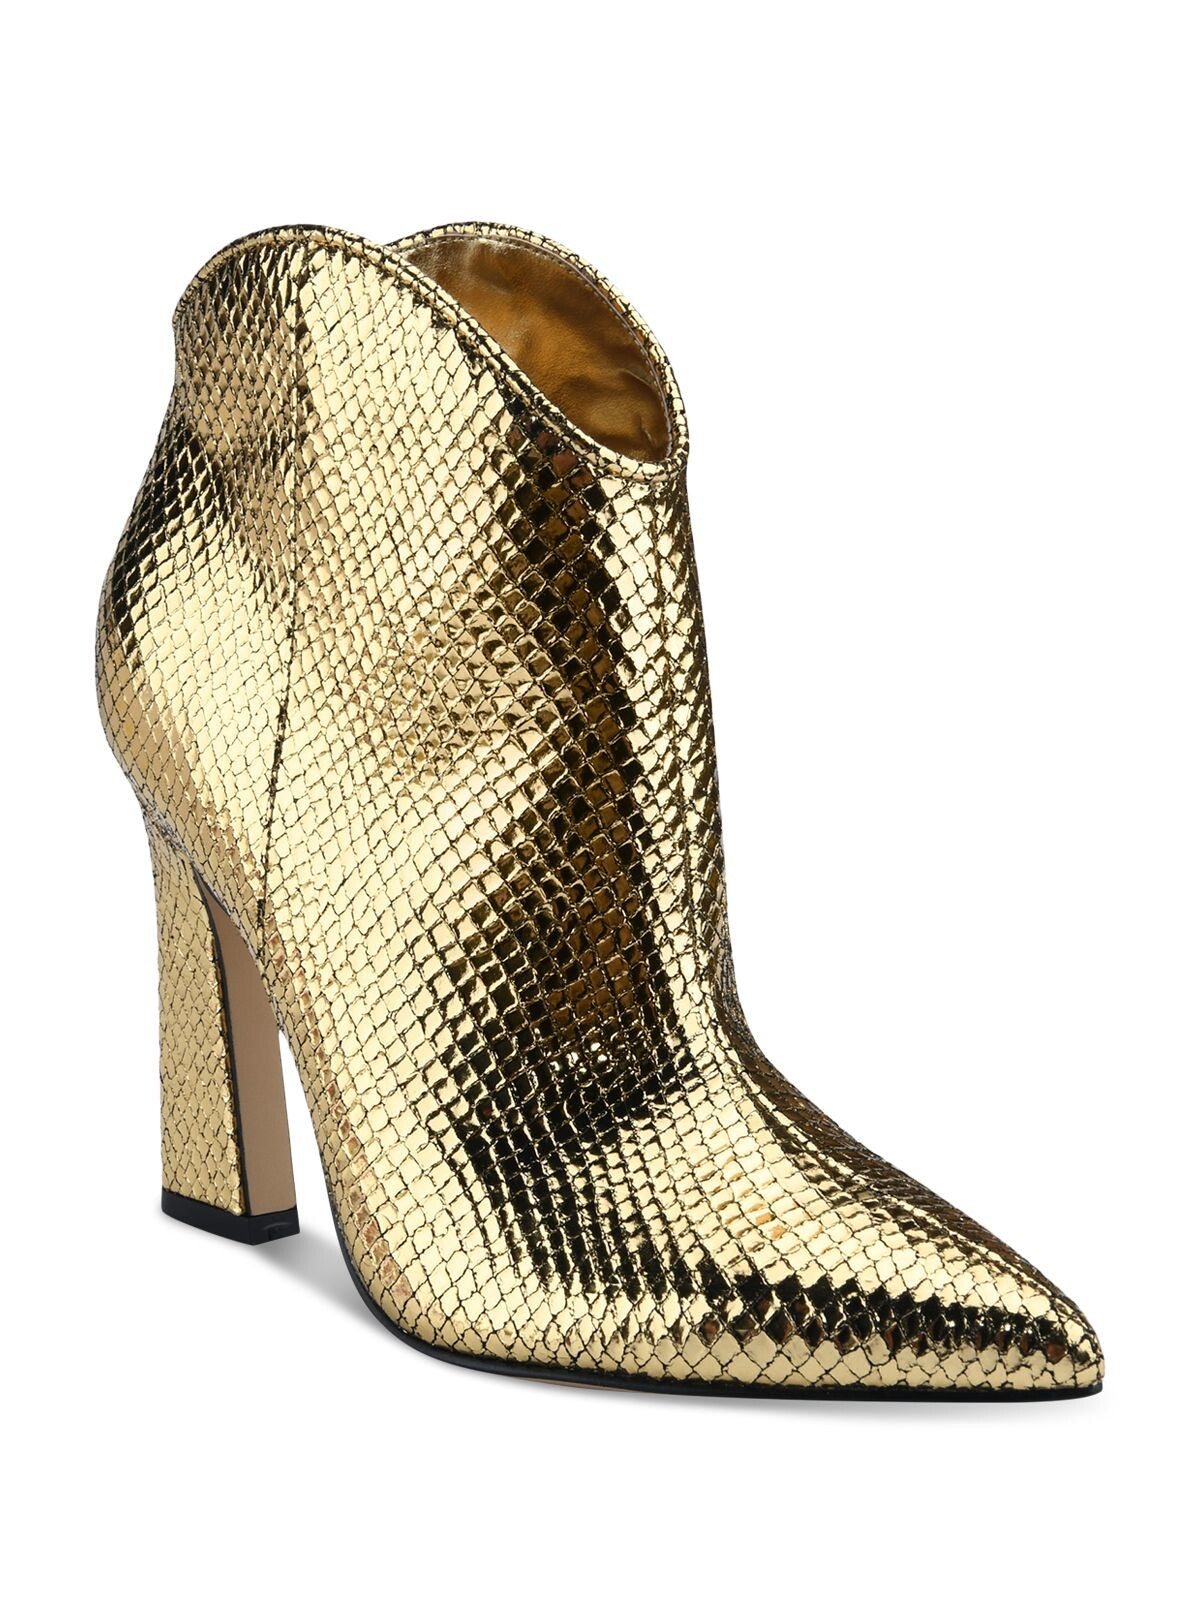 MARC FISHER Womens Gold Snake Western Comfort Masina Pointed Toe Sculpted Heel Leather Booties 7 M